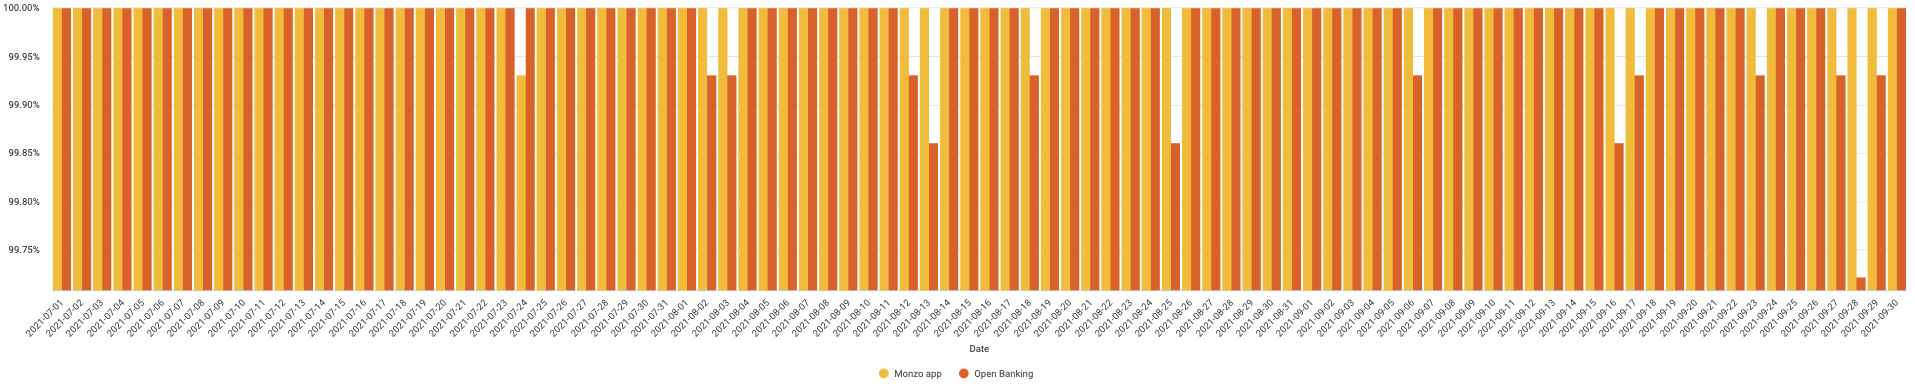 A chart showing the daily uptime of the Monzo App and Open Banking APIs. The data used to generate this chart is included in the table below.